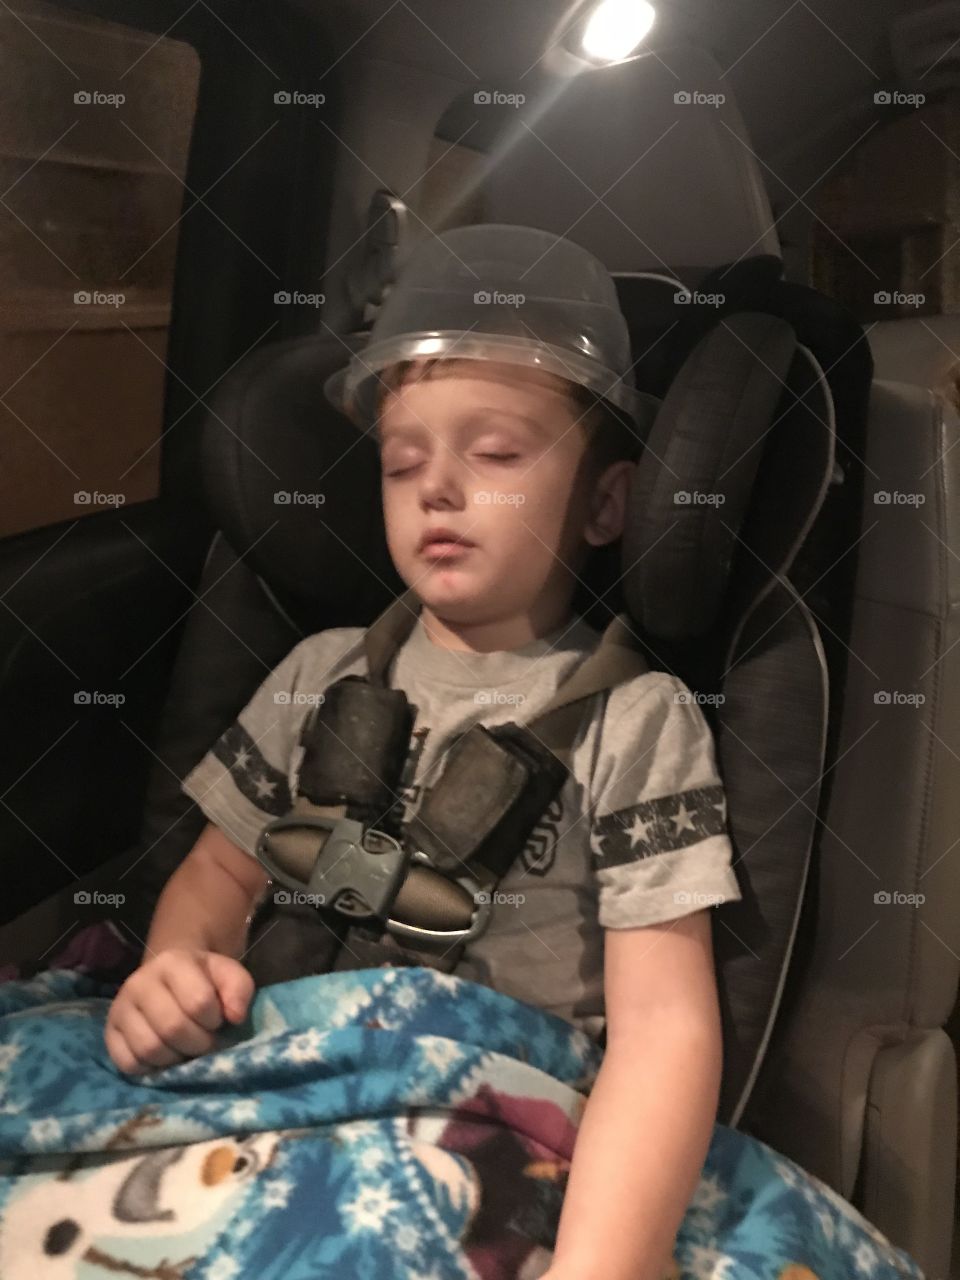 This little guy fell asleep in his carseat with a plastic bucket on his head. 